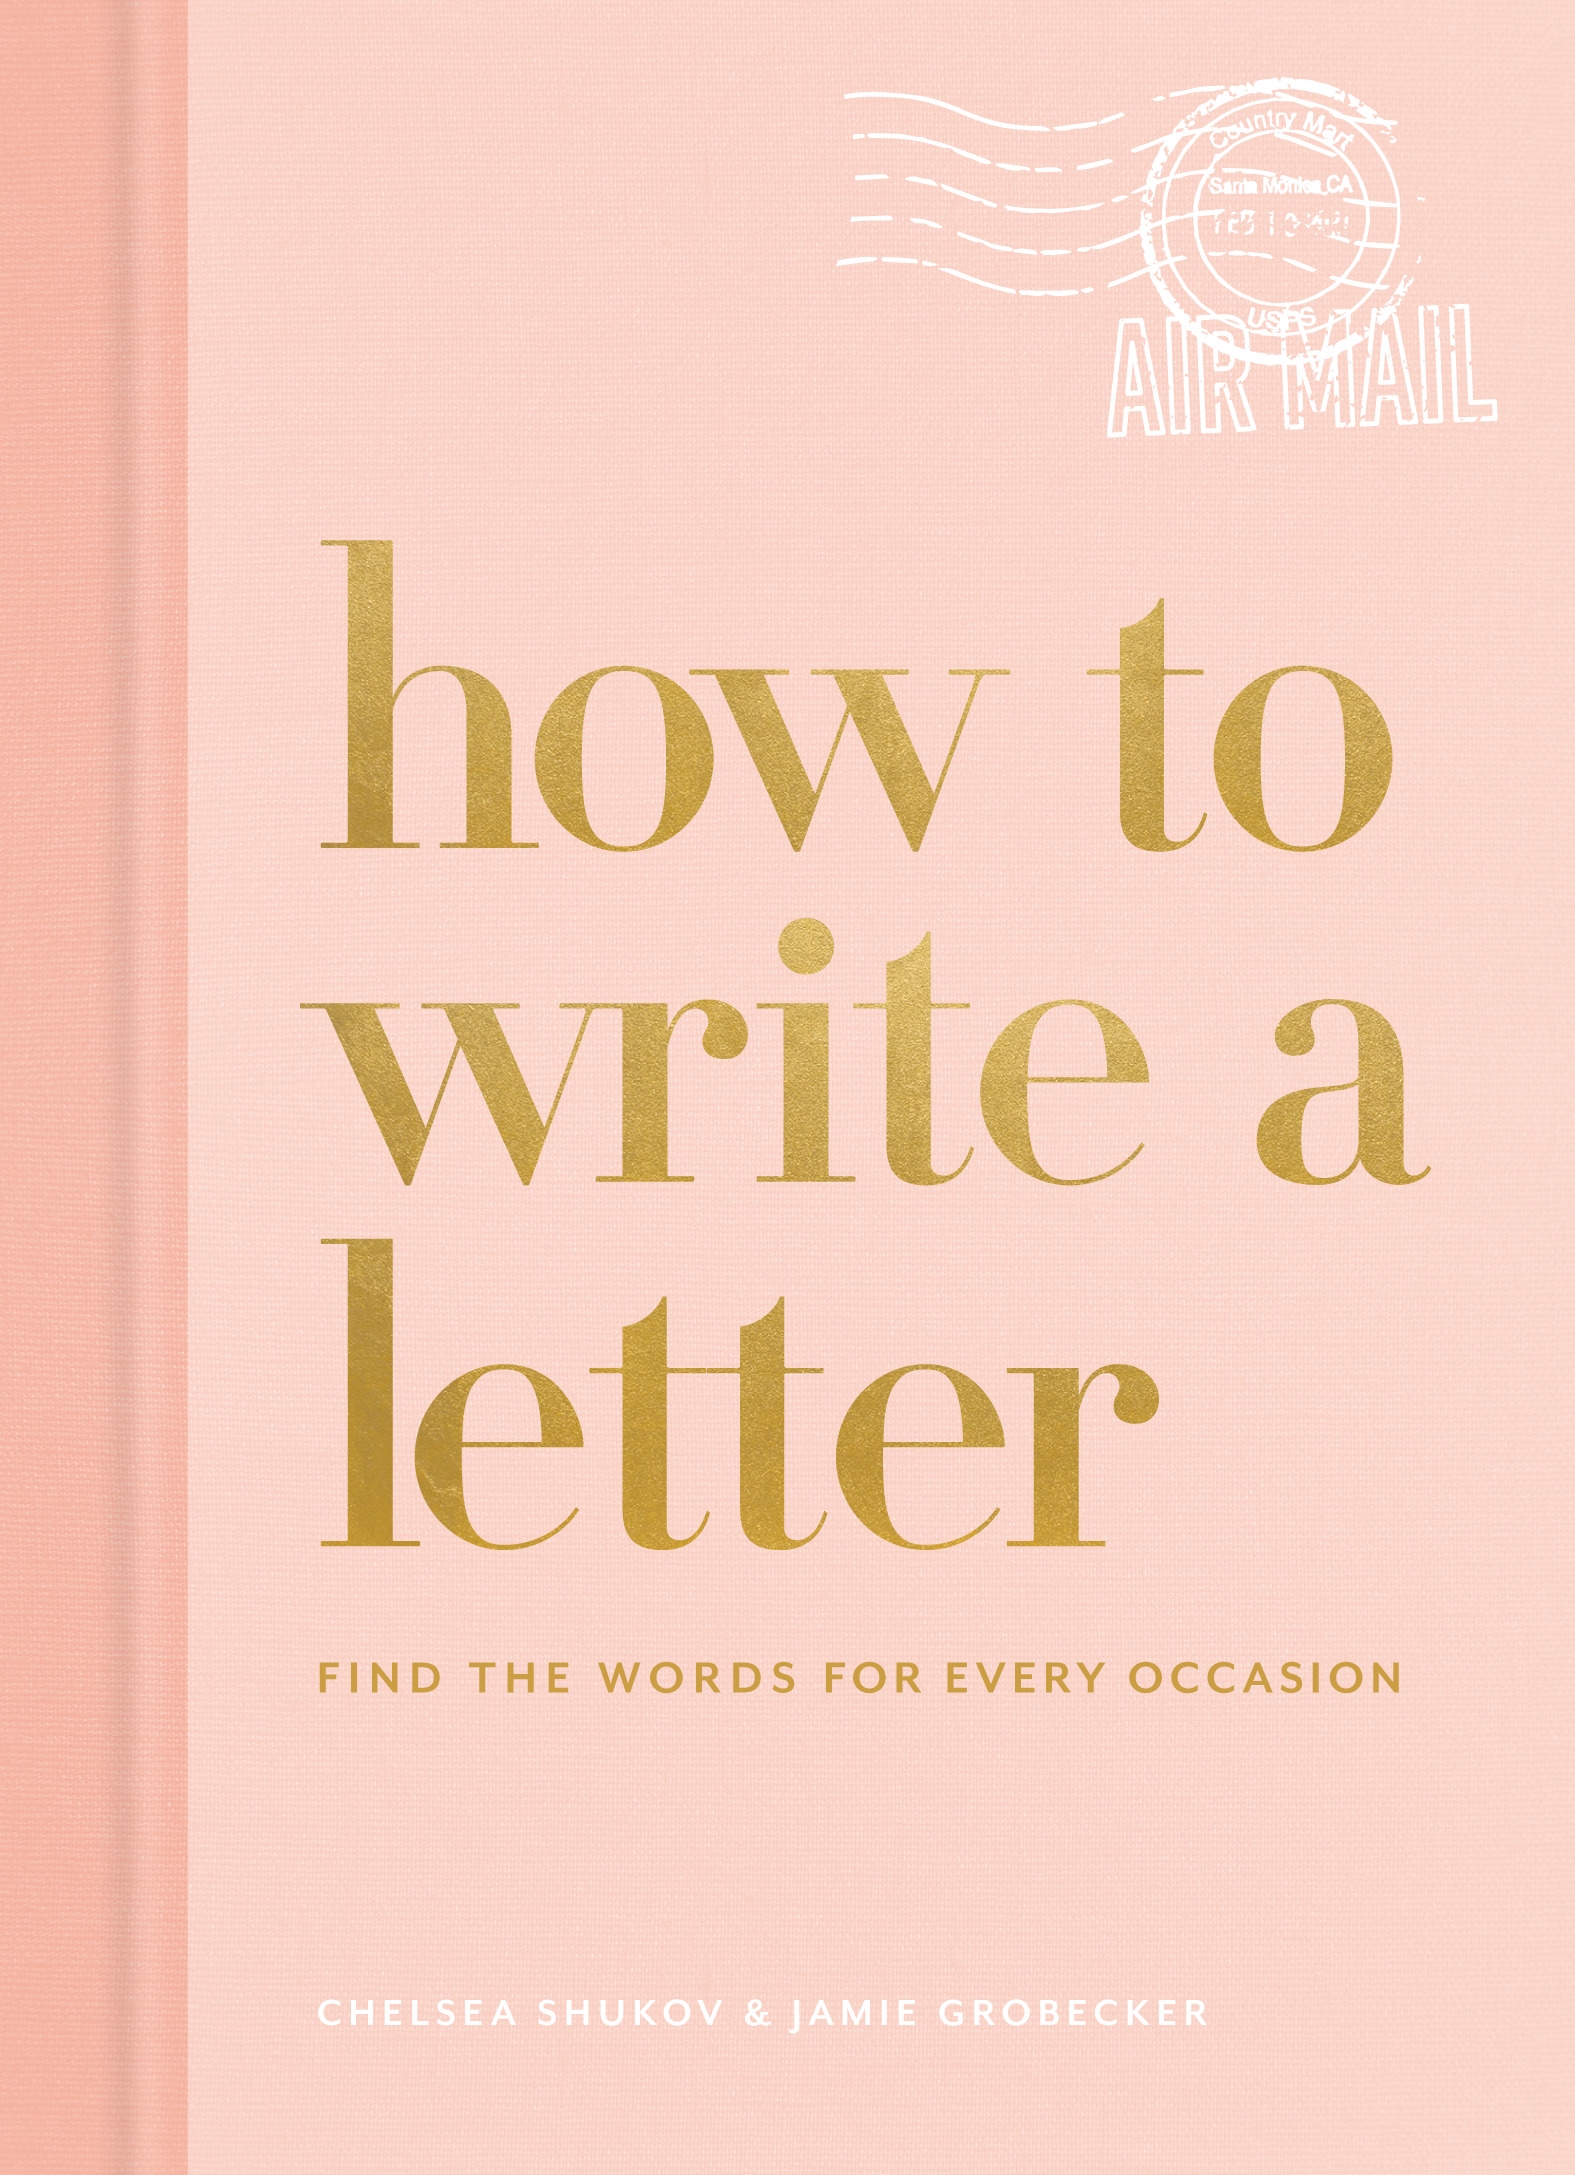 How To Write A Letter By Chelsea Shukov Penguin Books New Zealand